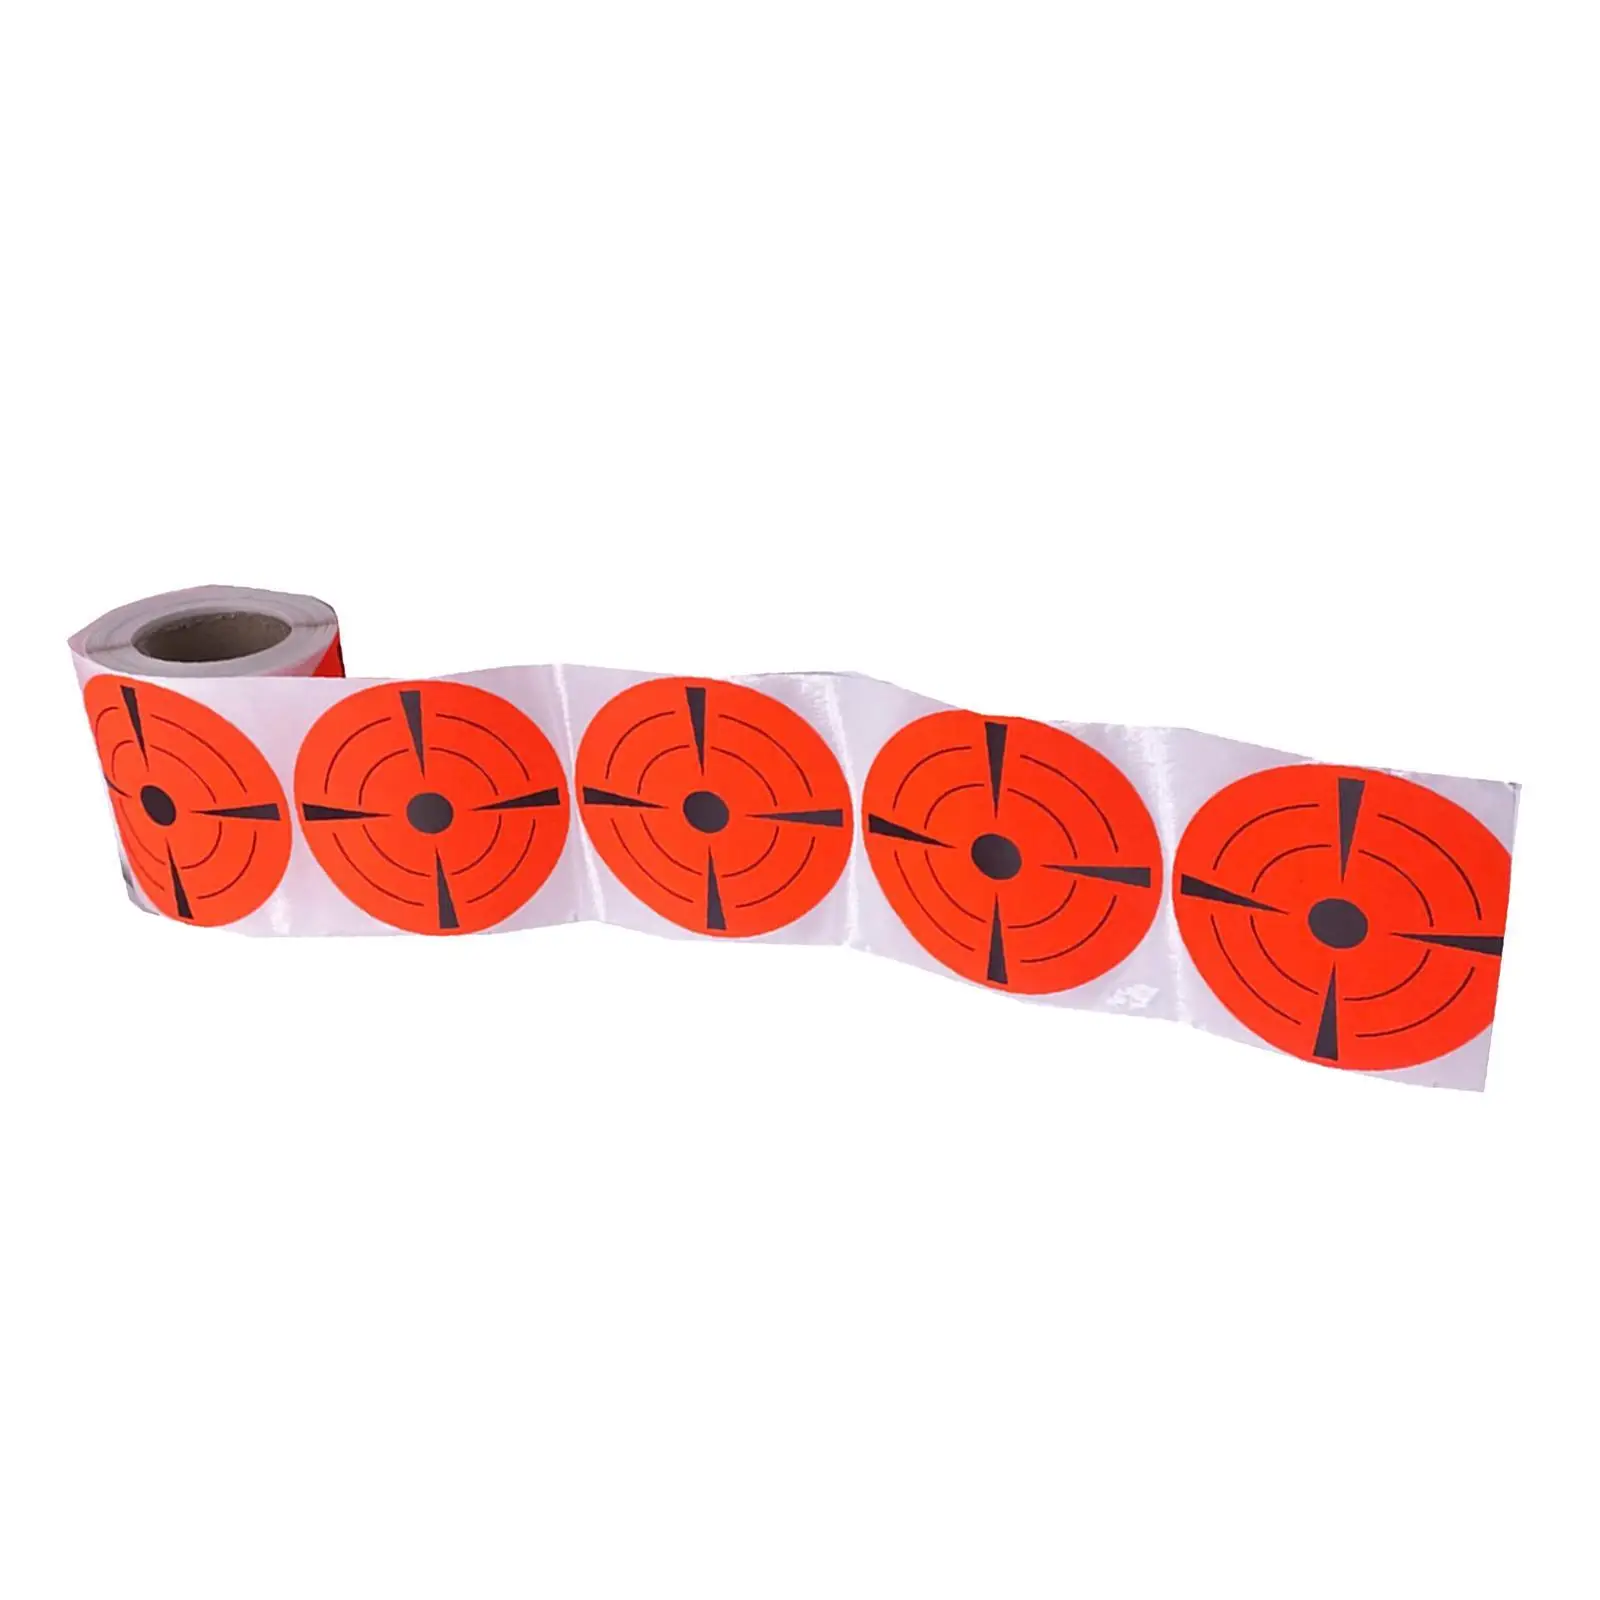 3 Inch Round  Target Fluorescent  Stickers Target Dots for 0 Pcs (Fluorescent)